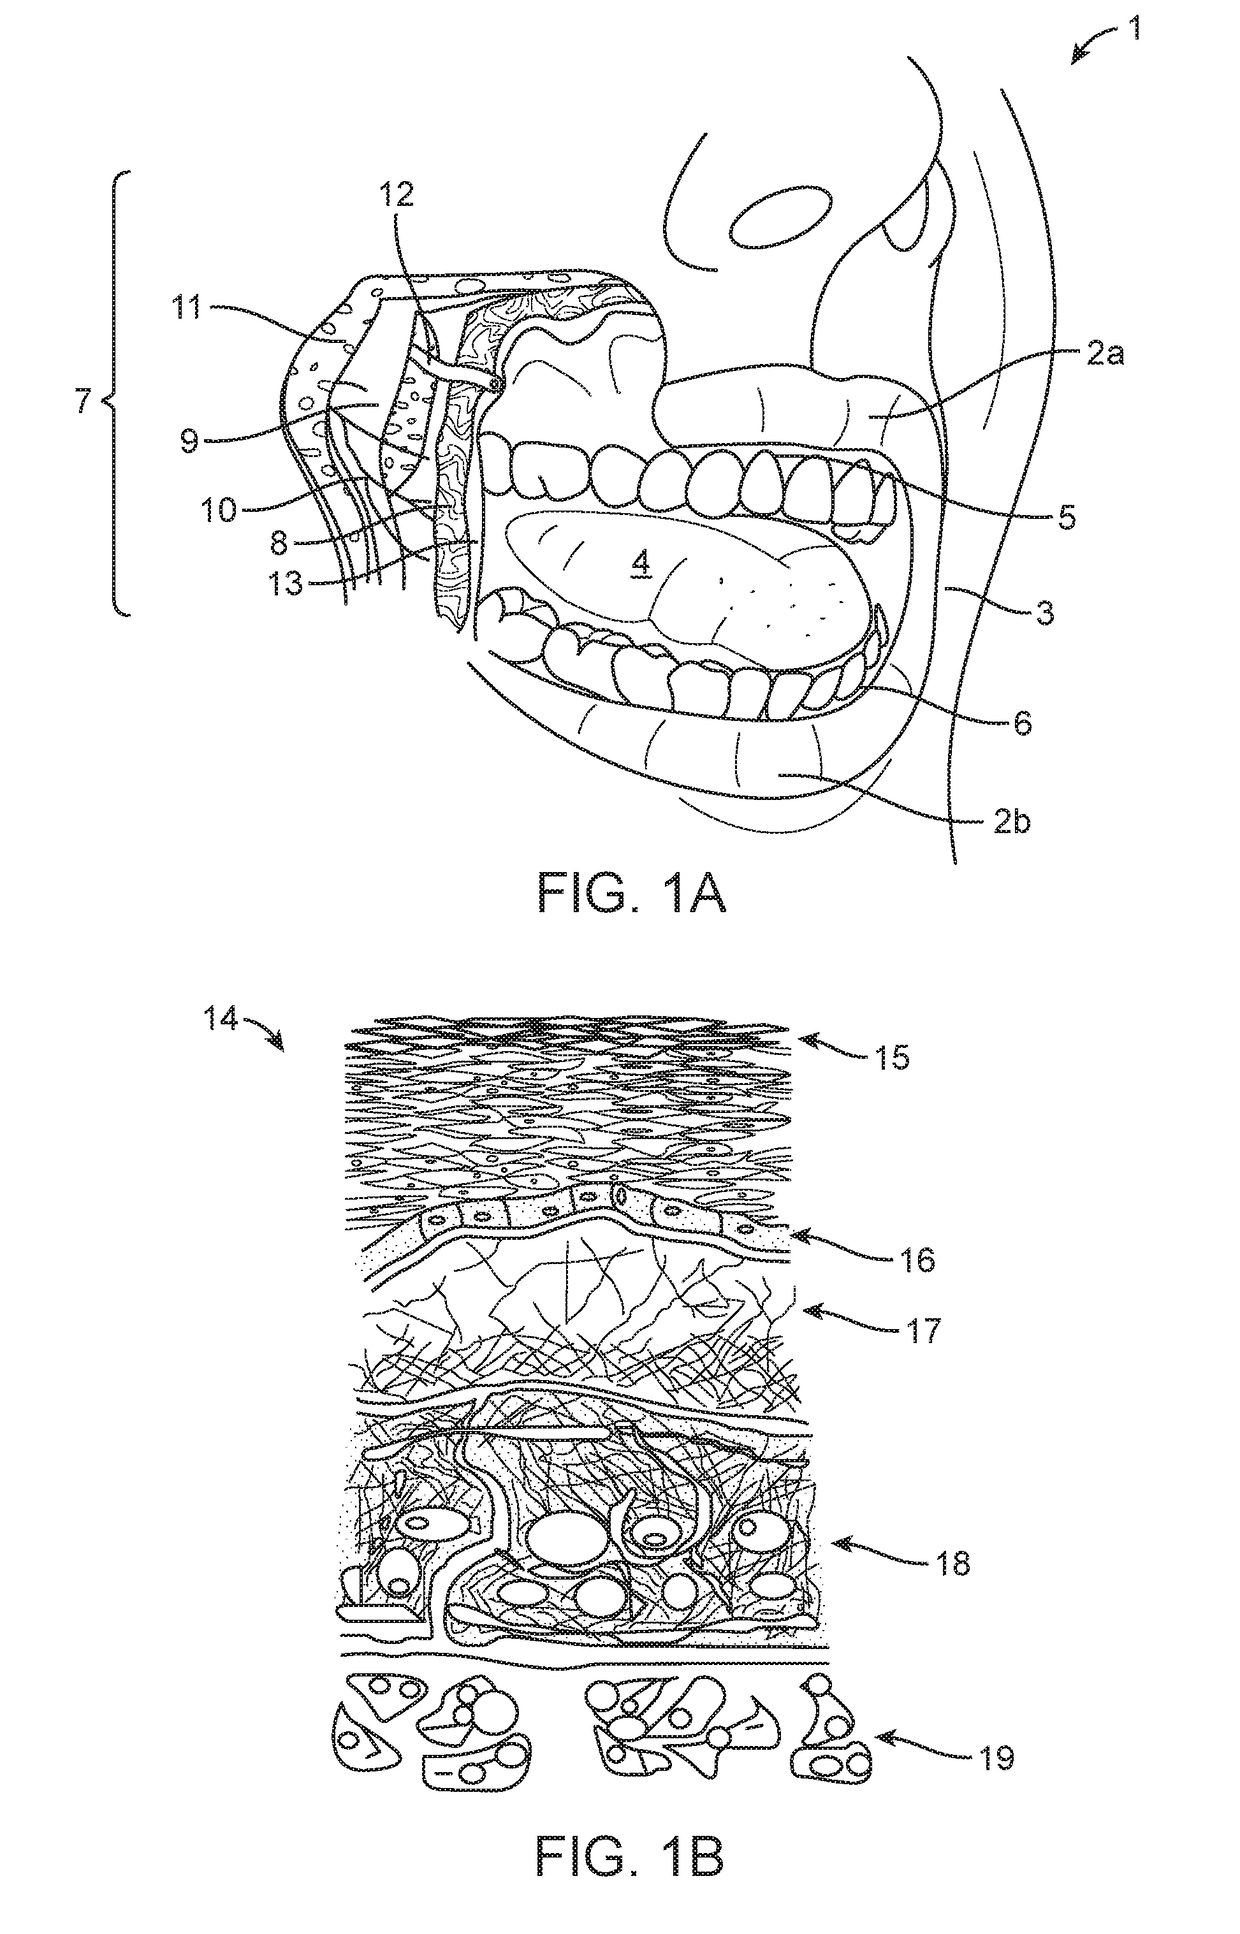 Apparatus and methods for rapid transmucosal drug delivery